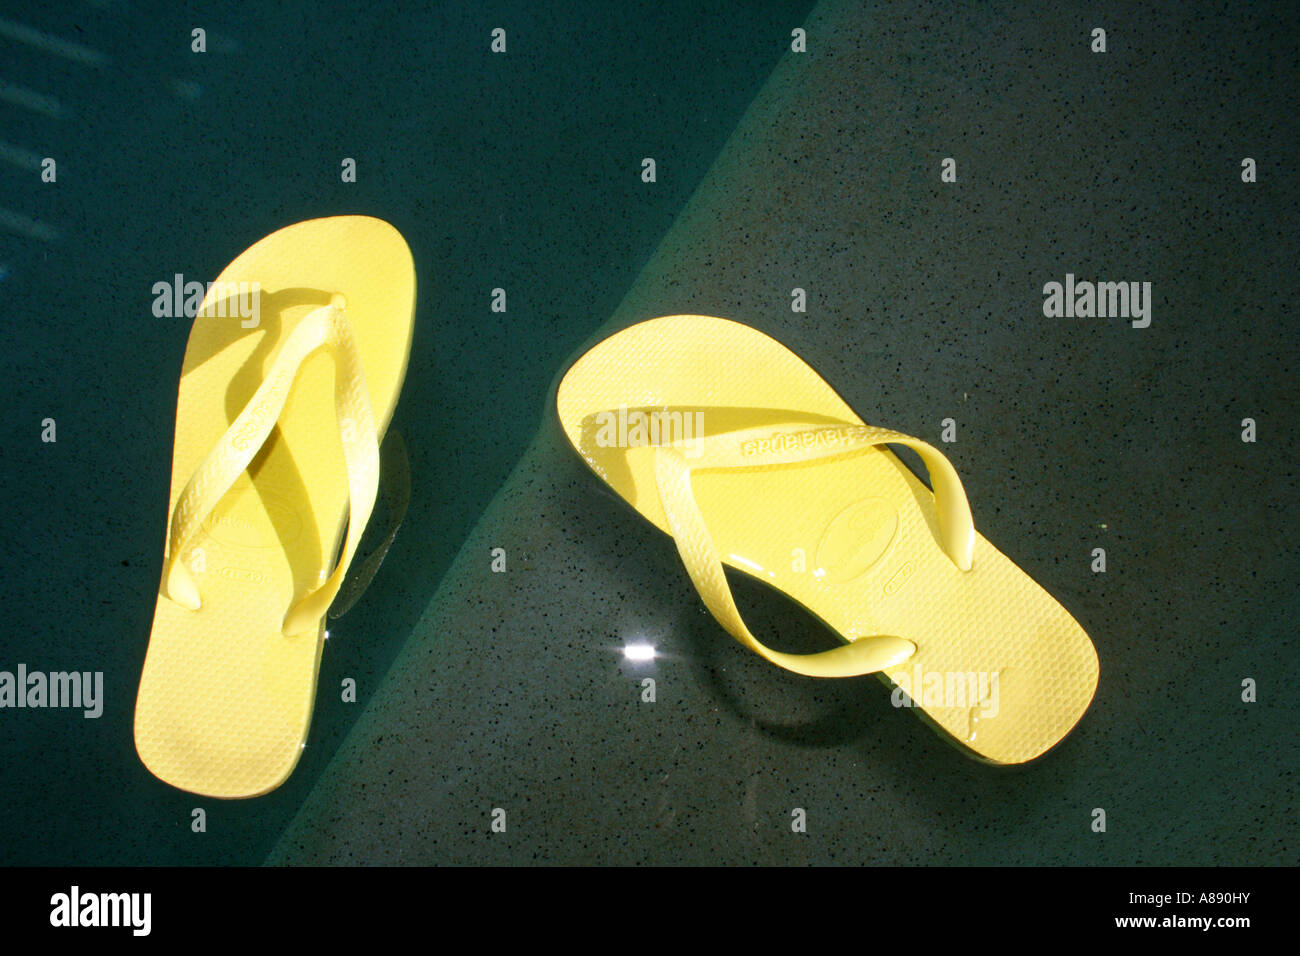 A PAIR OF THONGS BY A POOL BDA10601 Stock Photo - Alamy